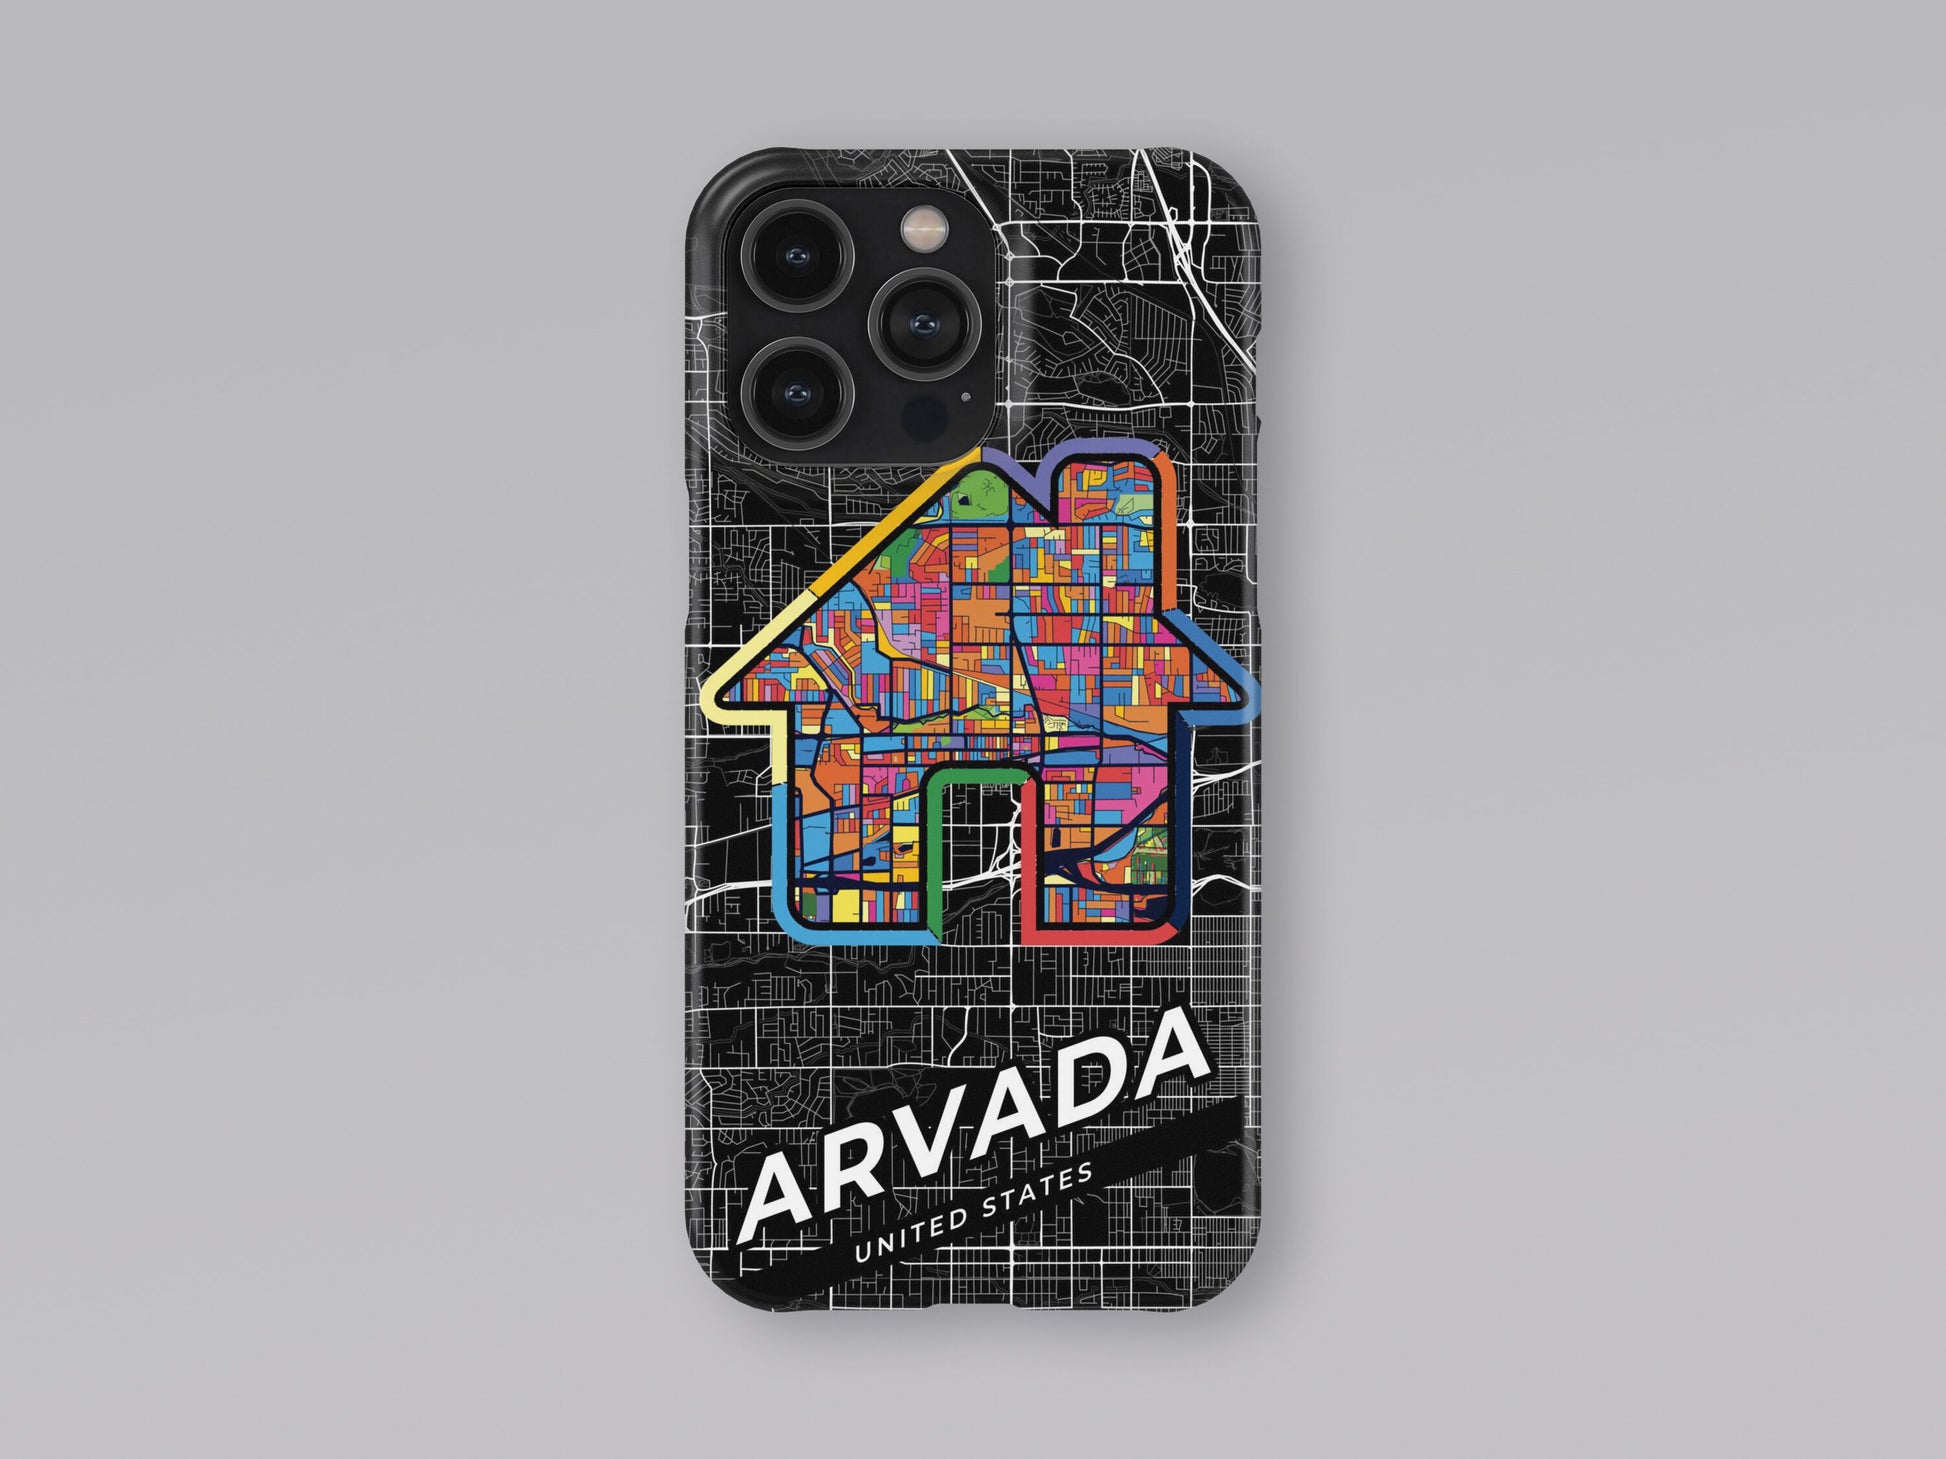 Arvada Colorado slim phone case with colorful icon. Birthday, wedding or housewarming gift. Couple match cases. 3